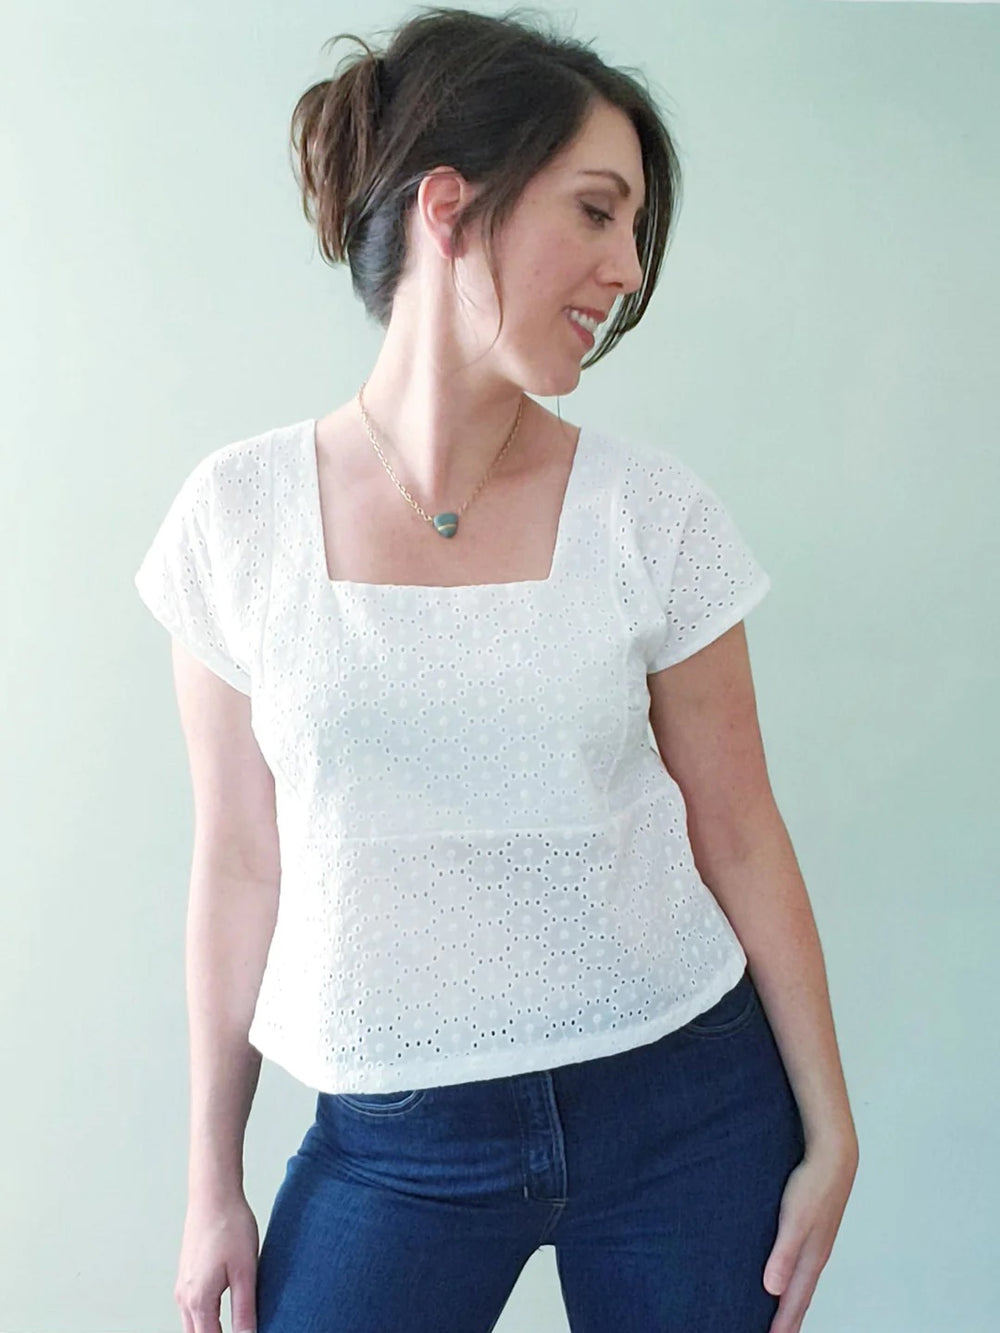 Woman wearing the Fern Top Expansion Pack sewing pattern from Pattern Scout on The Fold Line. A top pattern made in linen, chambray, poplin, voile, tencel, rayon challis, or crepe de chine fabric, featuring a boxy fit, square neck, and grown-on short slee